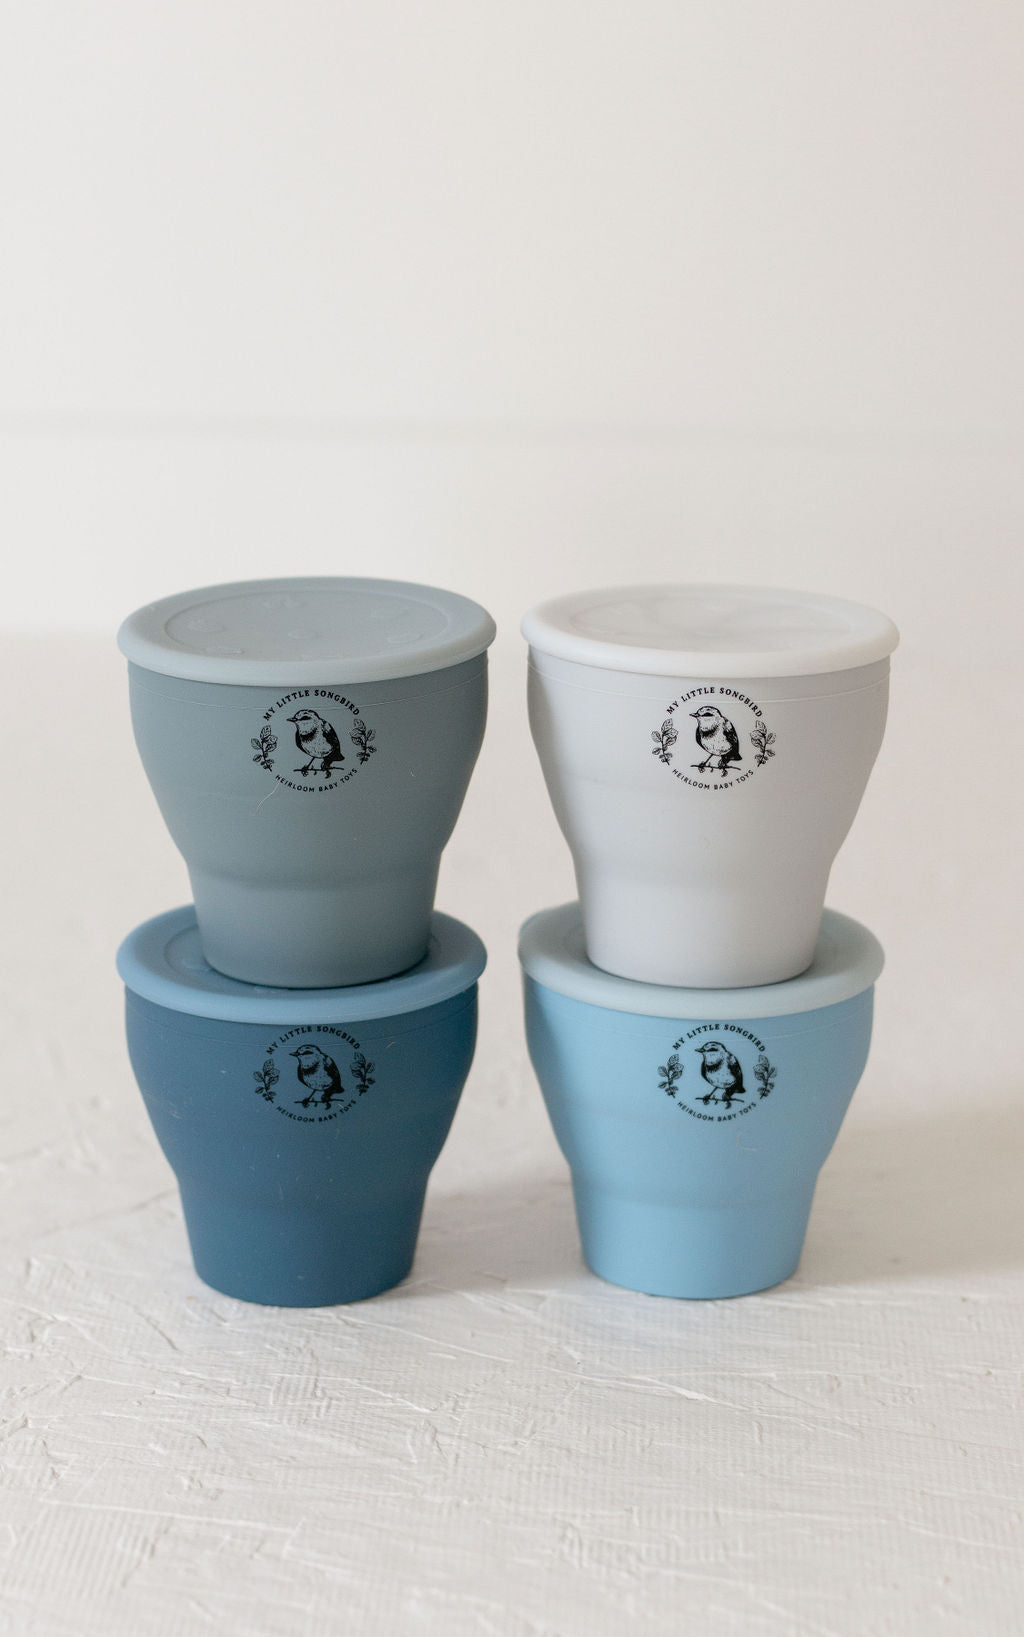 Grey Collapsible Silicone Snack Cup Baby and Toddler by MKS USA